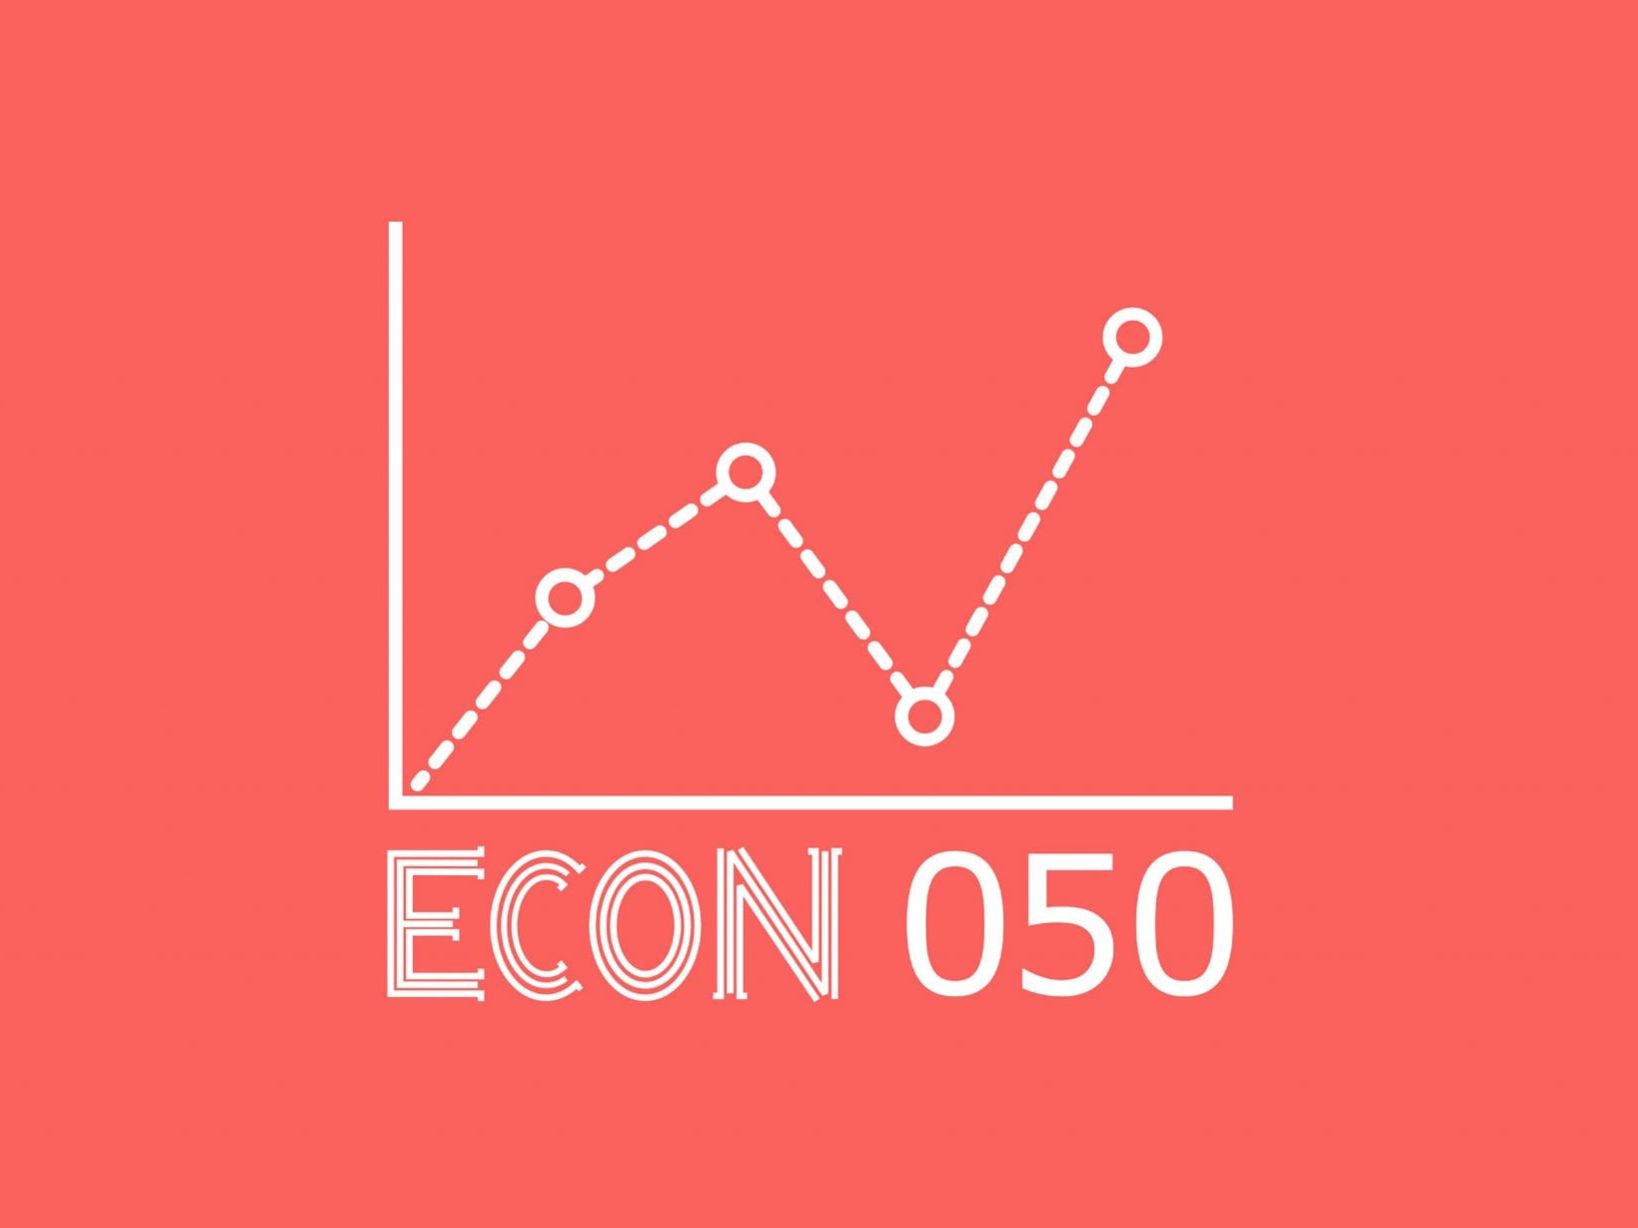 Econ 050 is a podcast on the economics and business topics that matter to the Netherlands and the wider world, made by the Faculty of Economics and Business and the Northern Times.